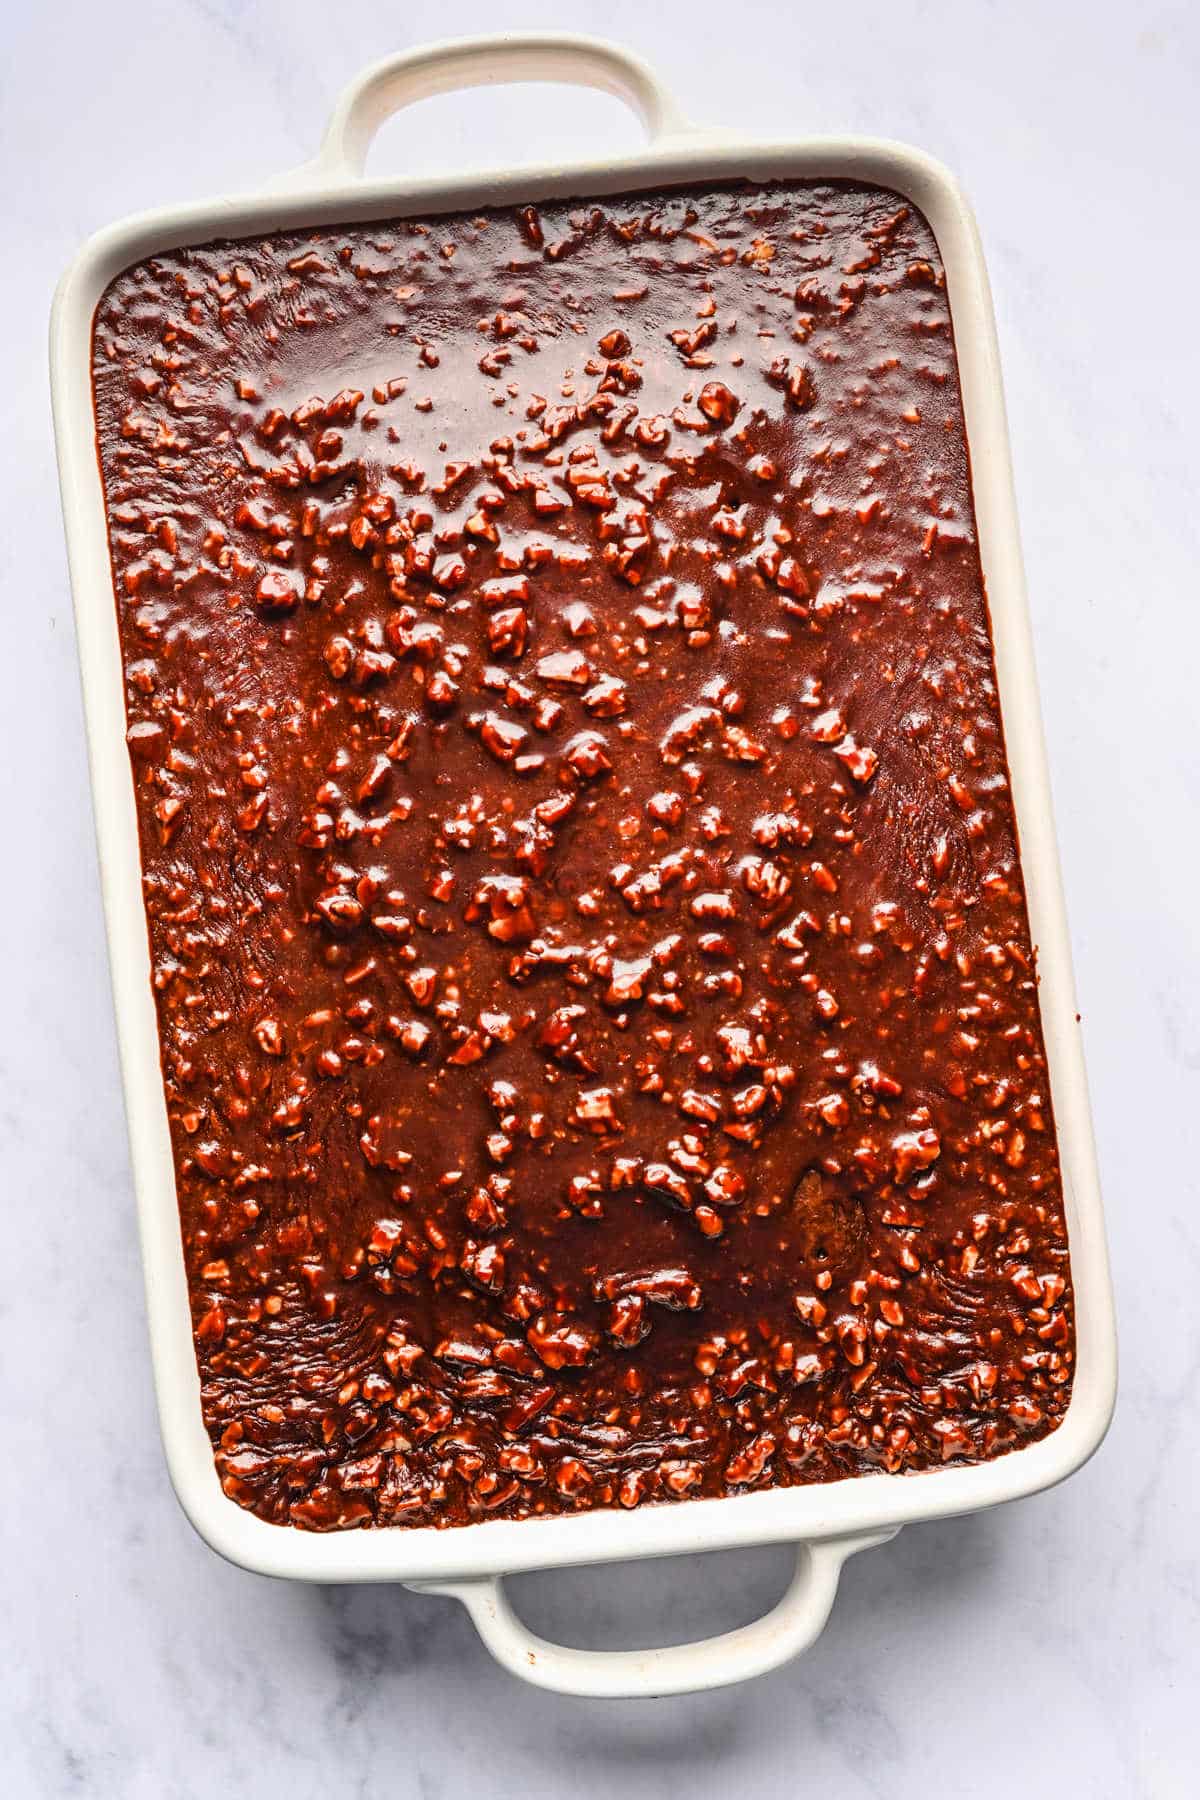 Coca Cola cake icing poured over a hot baked Coca Cola cake.